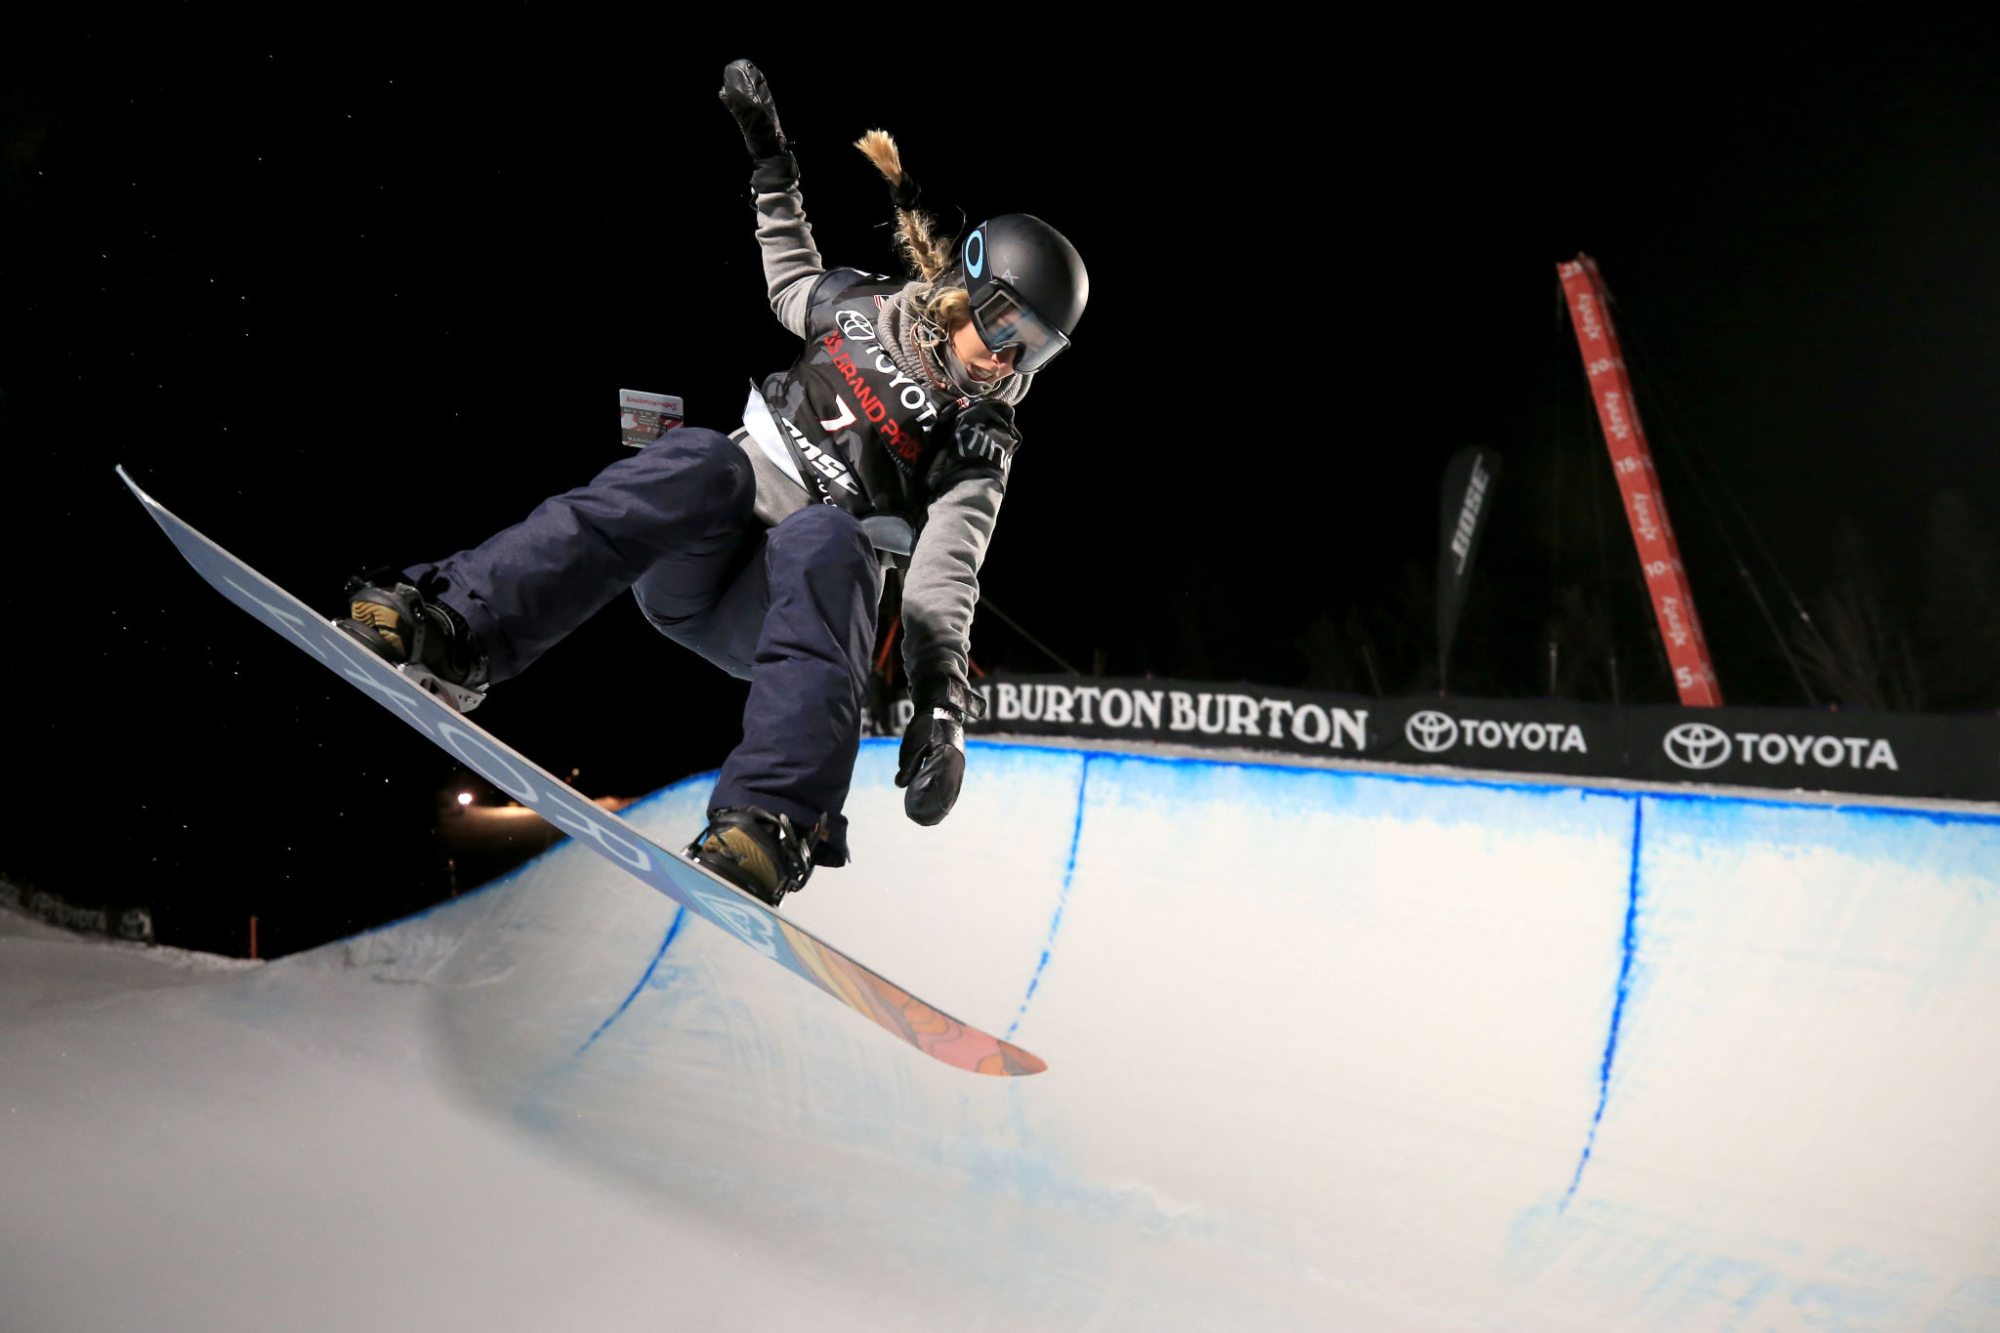 Maddie Mastro competes on the halfpipe during a Toyota United States Grand Prix event at Mammoth Mountain in January 2018.